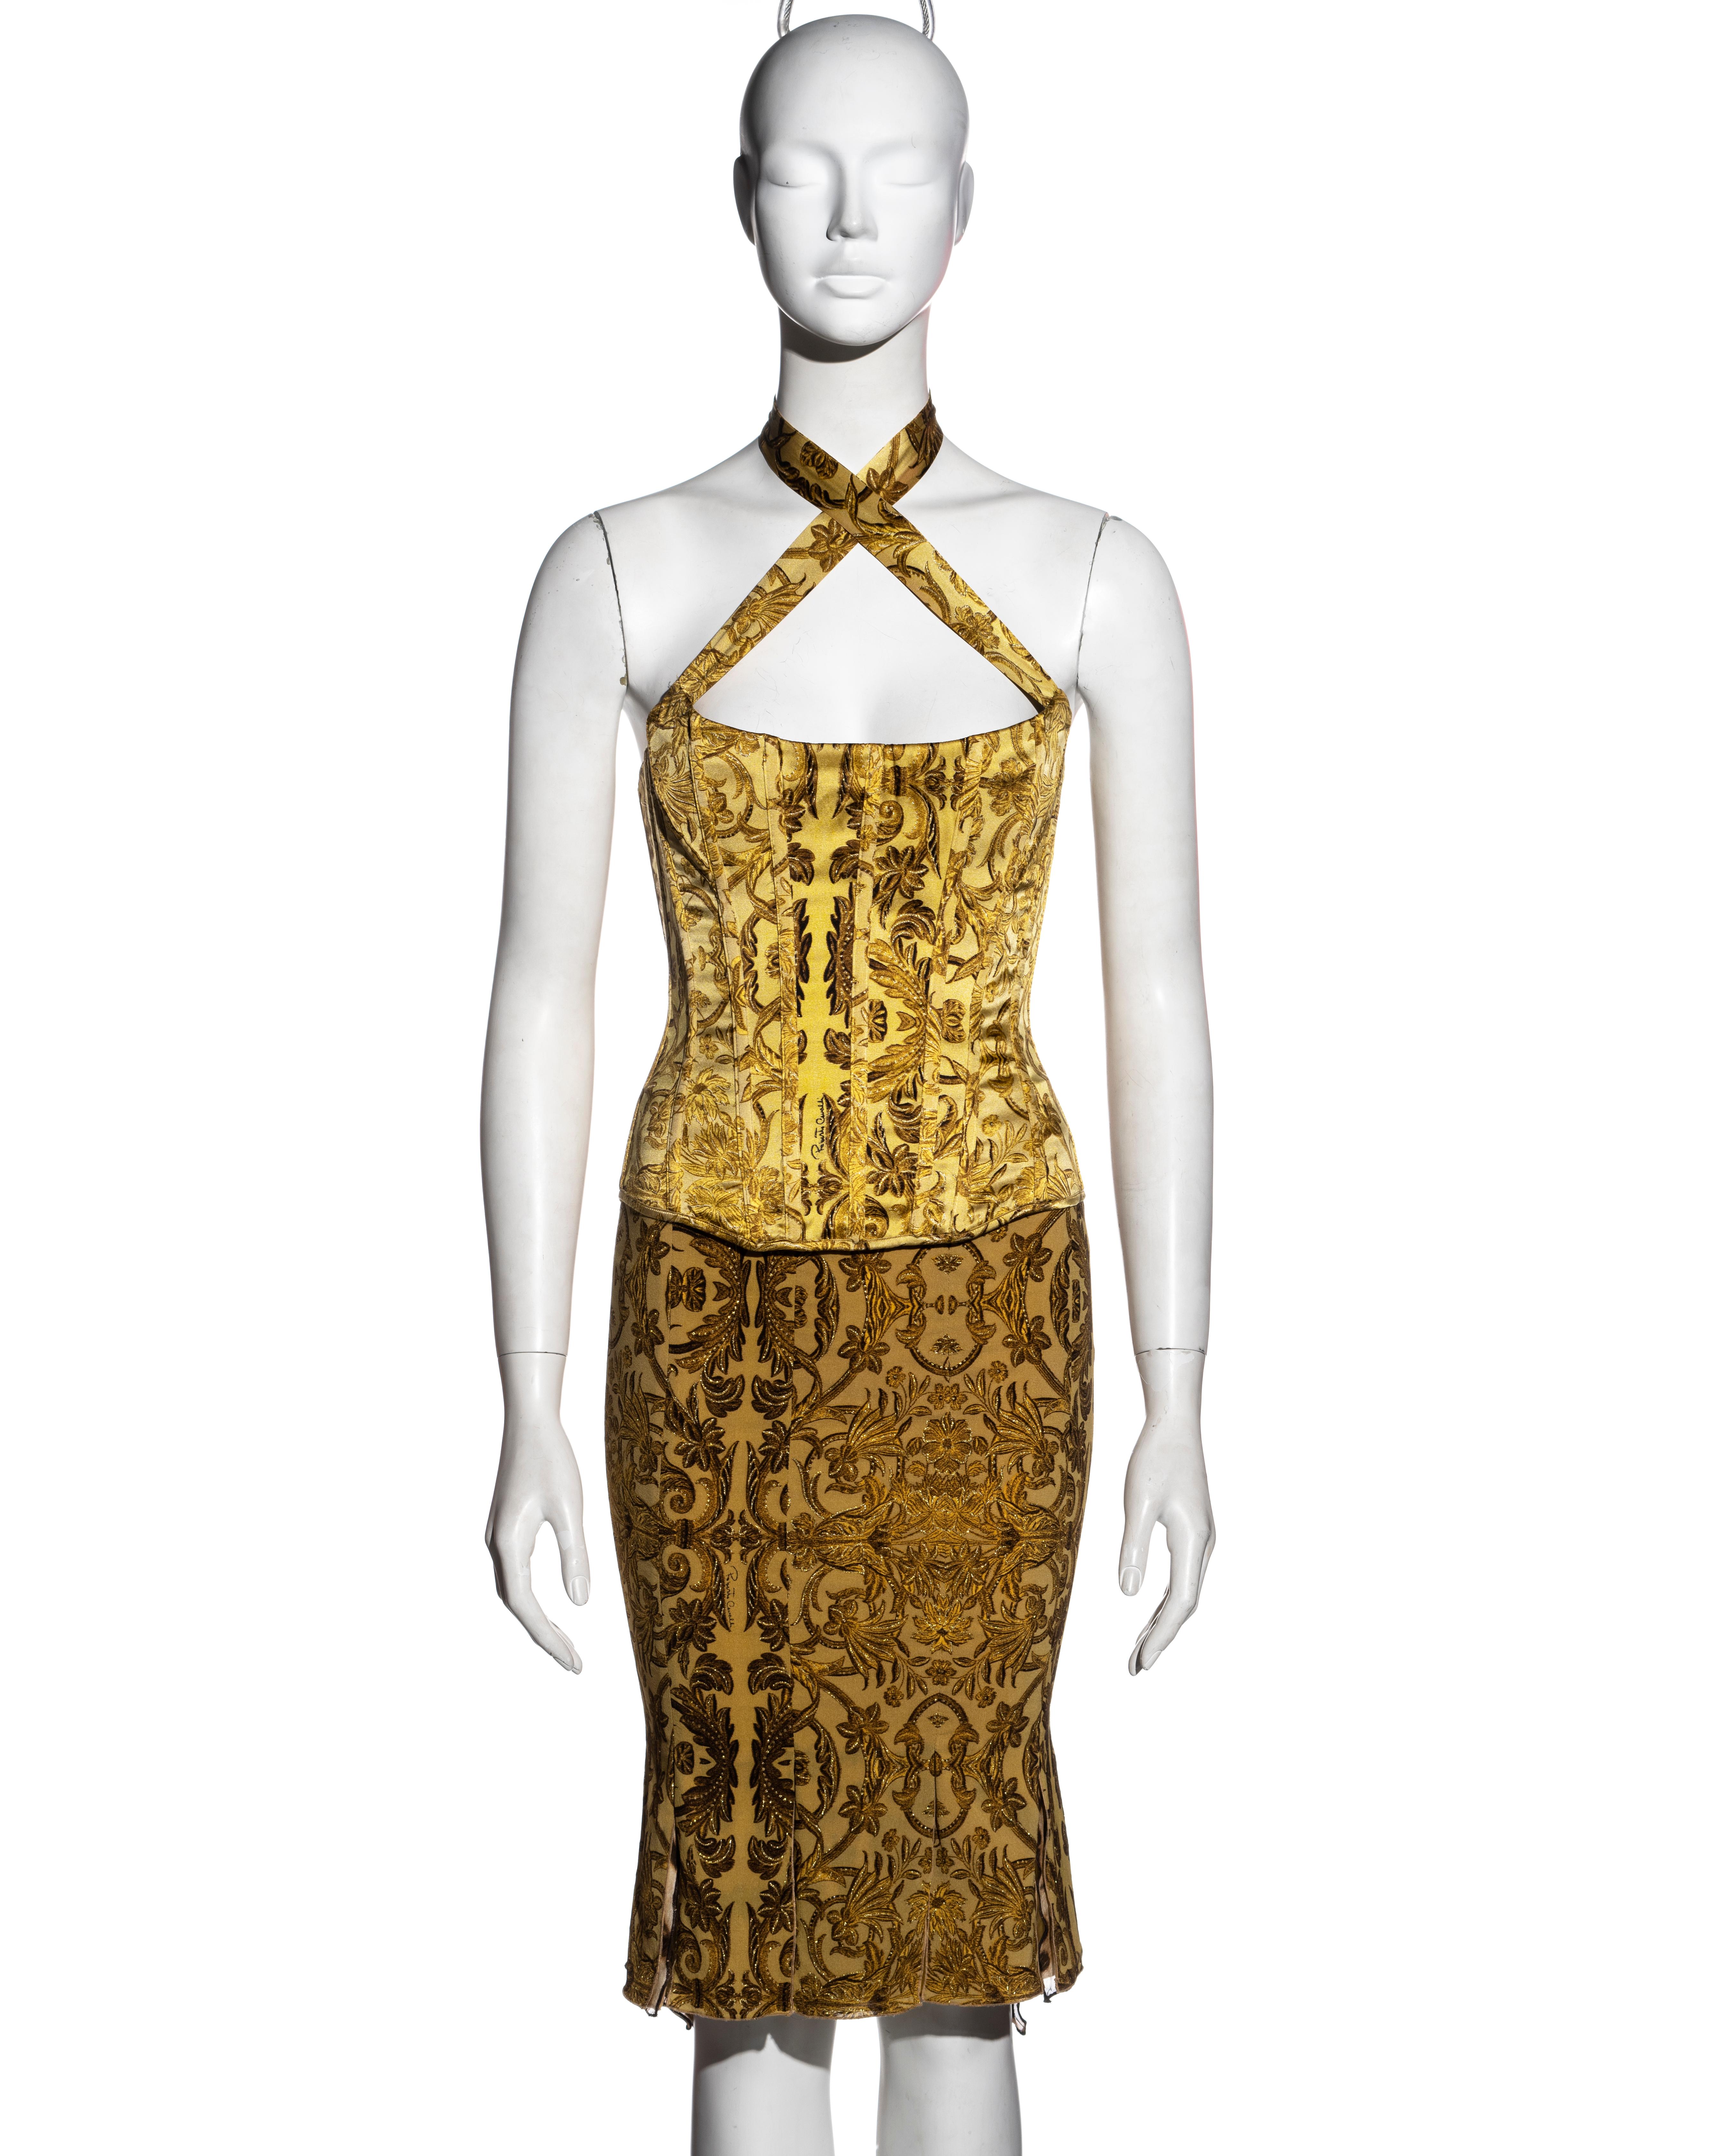 ▪ Roberto Cavalli silk corset and skirt set
▪ Yellow and gold brocade-print  
▪ Corset top with boning and halter-neck straps which criss-cross at the front  
▪ Knee-length skirt with multiple slits and cheetah print underlay  
▪ Size: Small 
▪